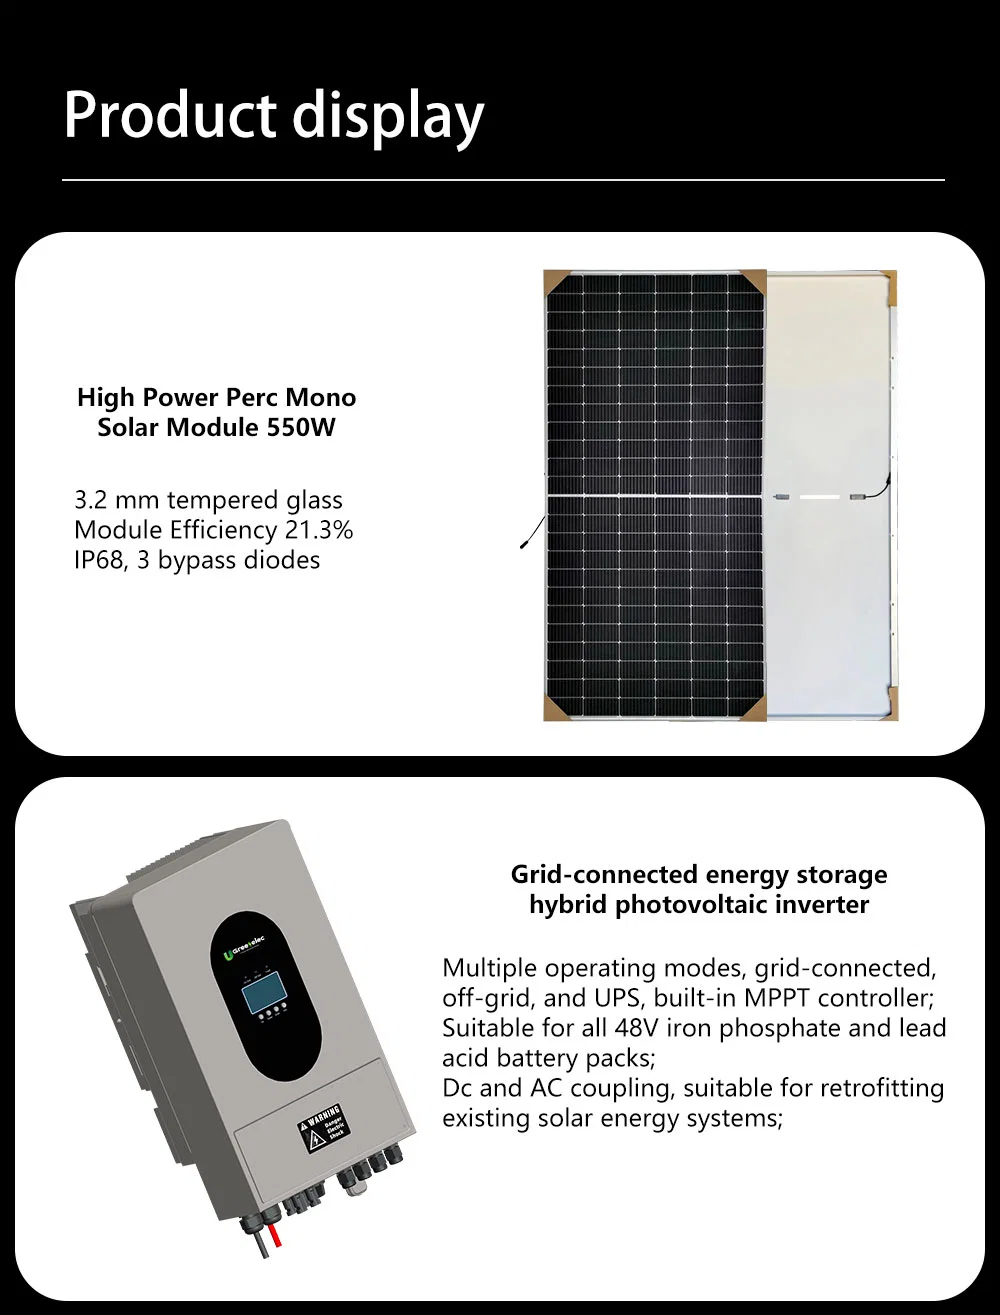 U-Greenelec 5kw 10kw 15kw 20kw 30kw Hybrid on/off Grid Solar PV Inverter Panels Photovoltaic Home Energy Storage Module System Kit with Lithium-Ion Battery